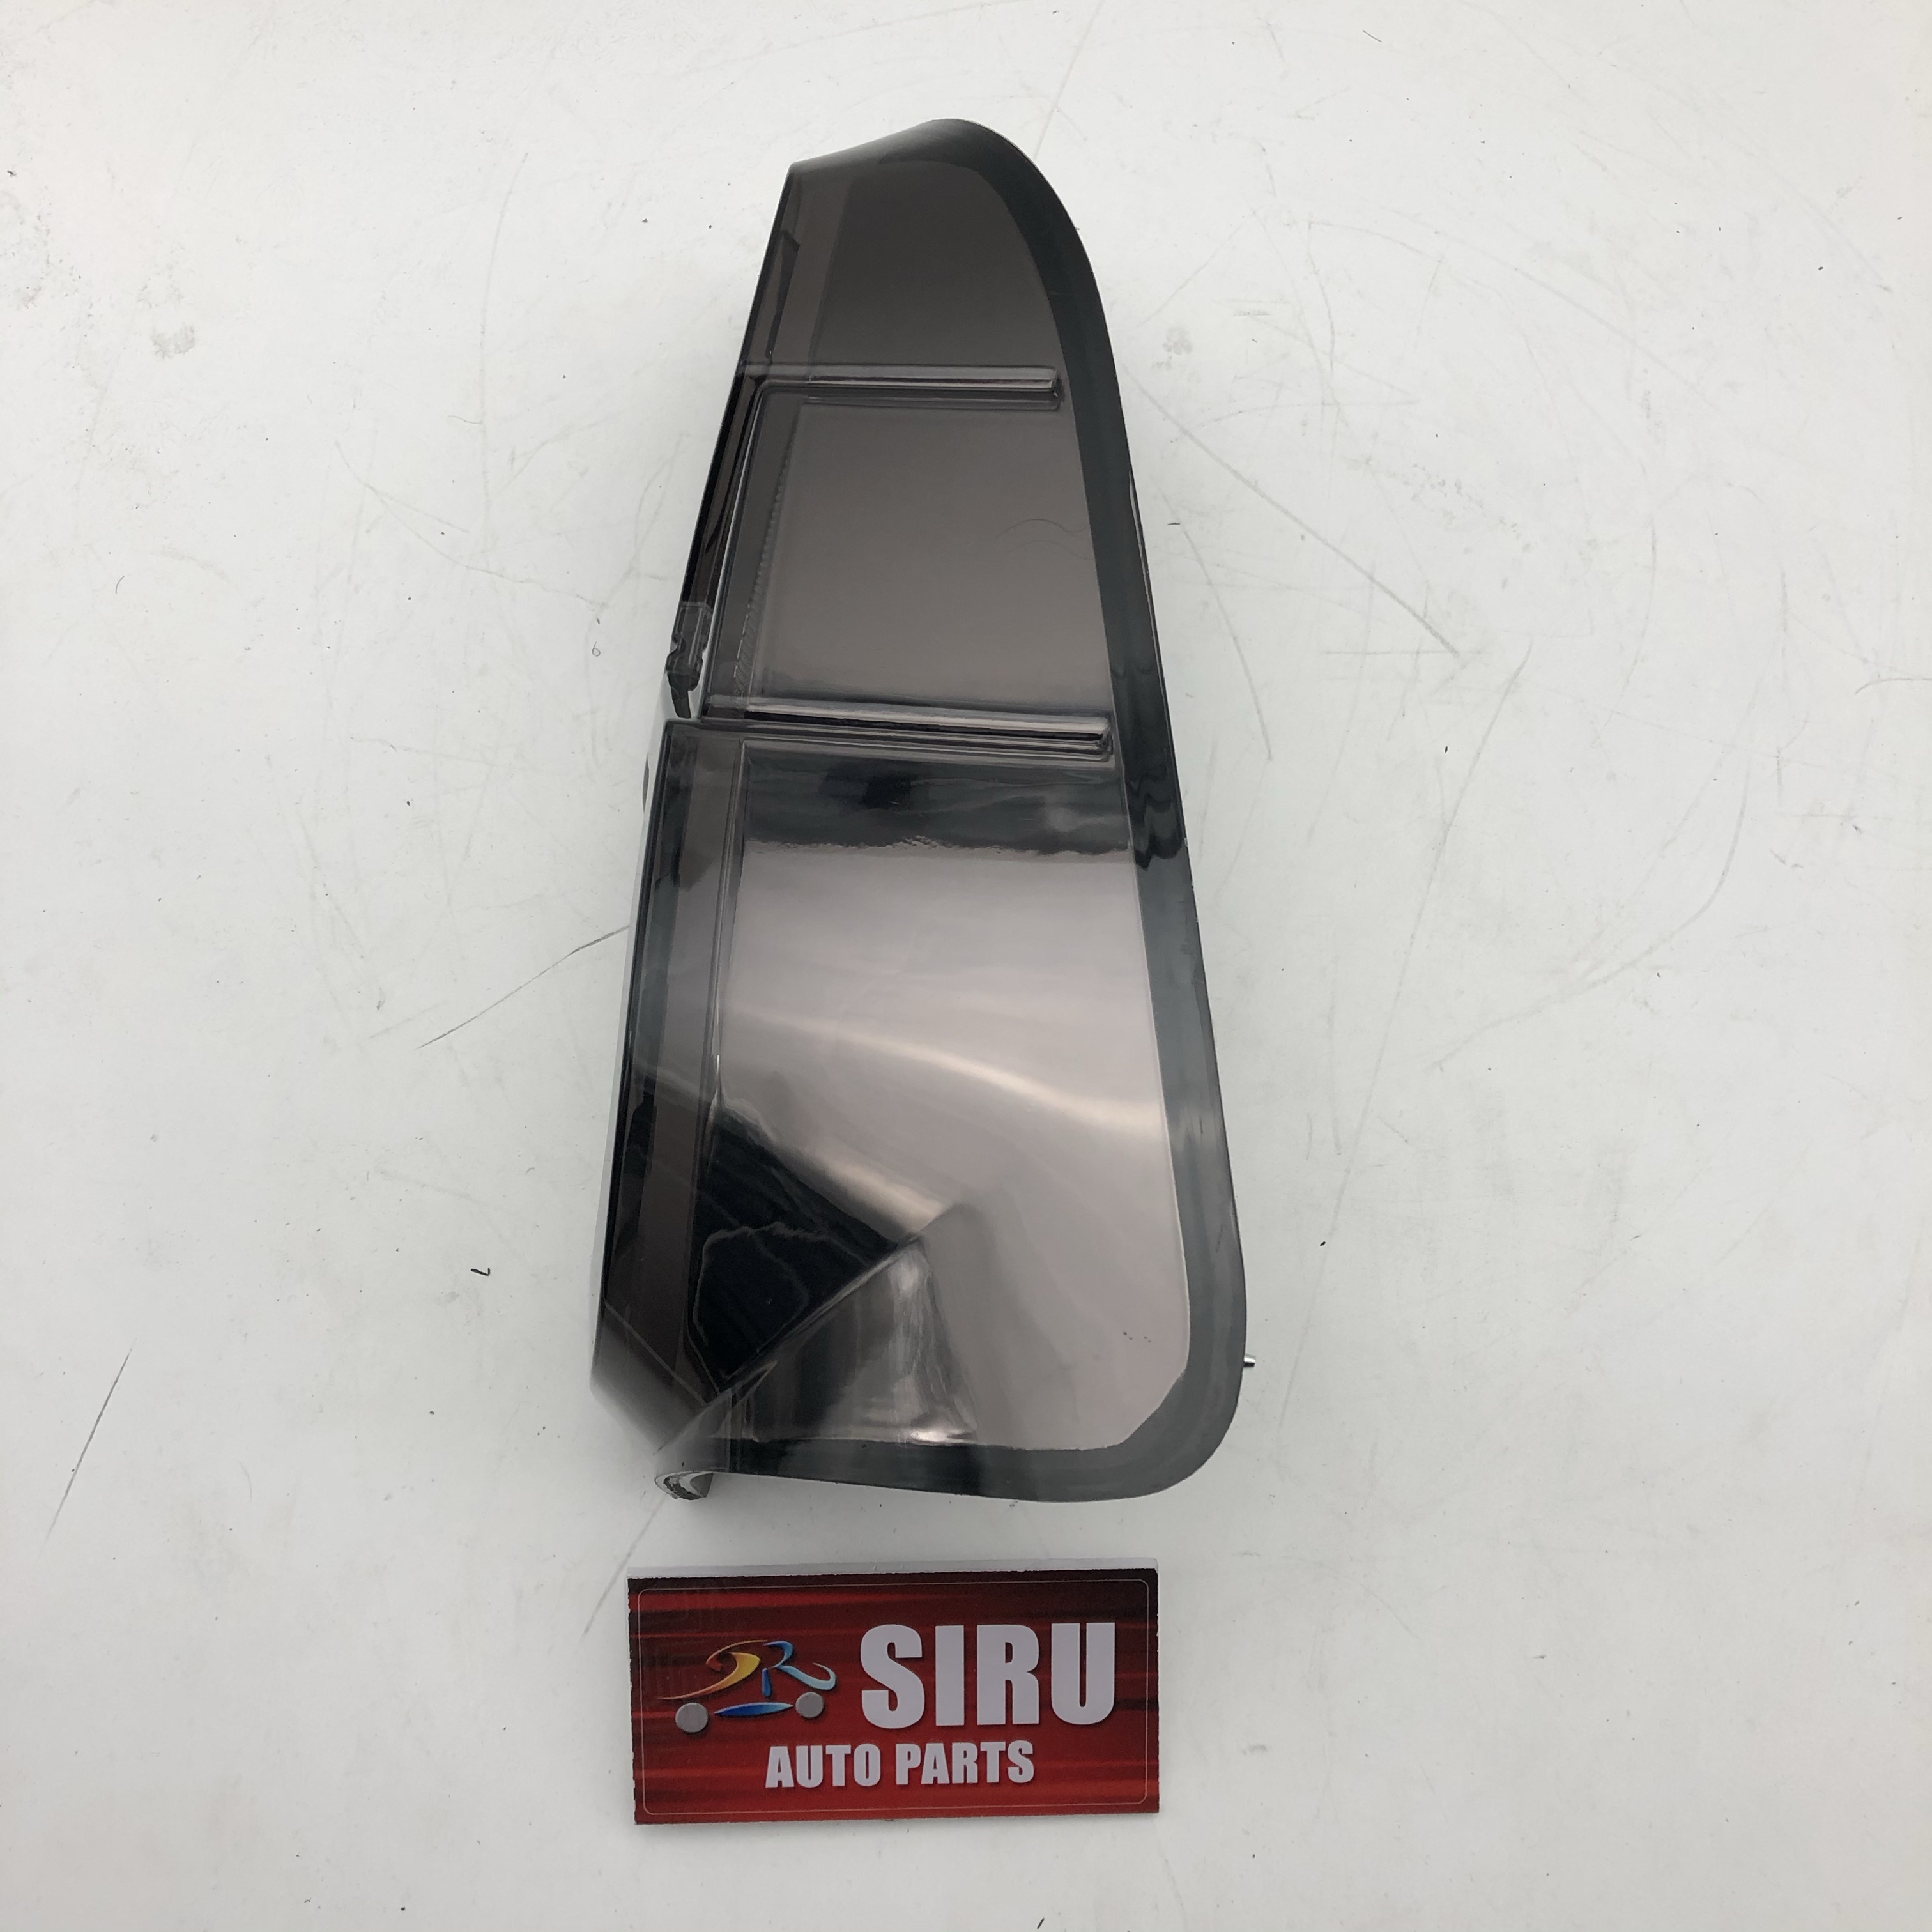 Hilux 2020 Style Tail Lights for Toyota Hilux Vigo 2012-2015